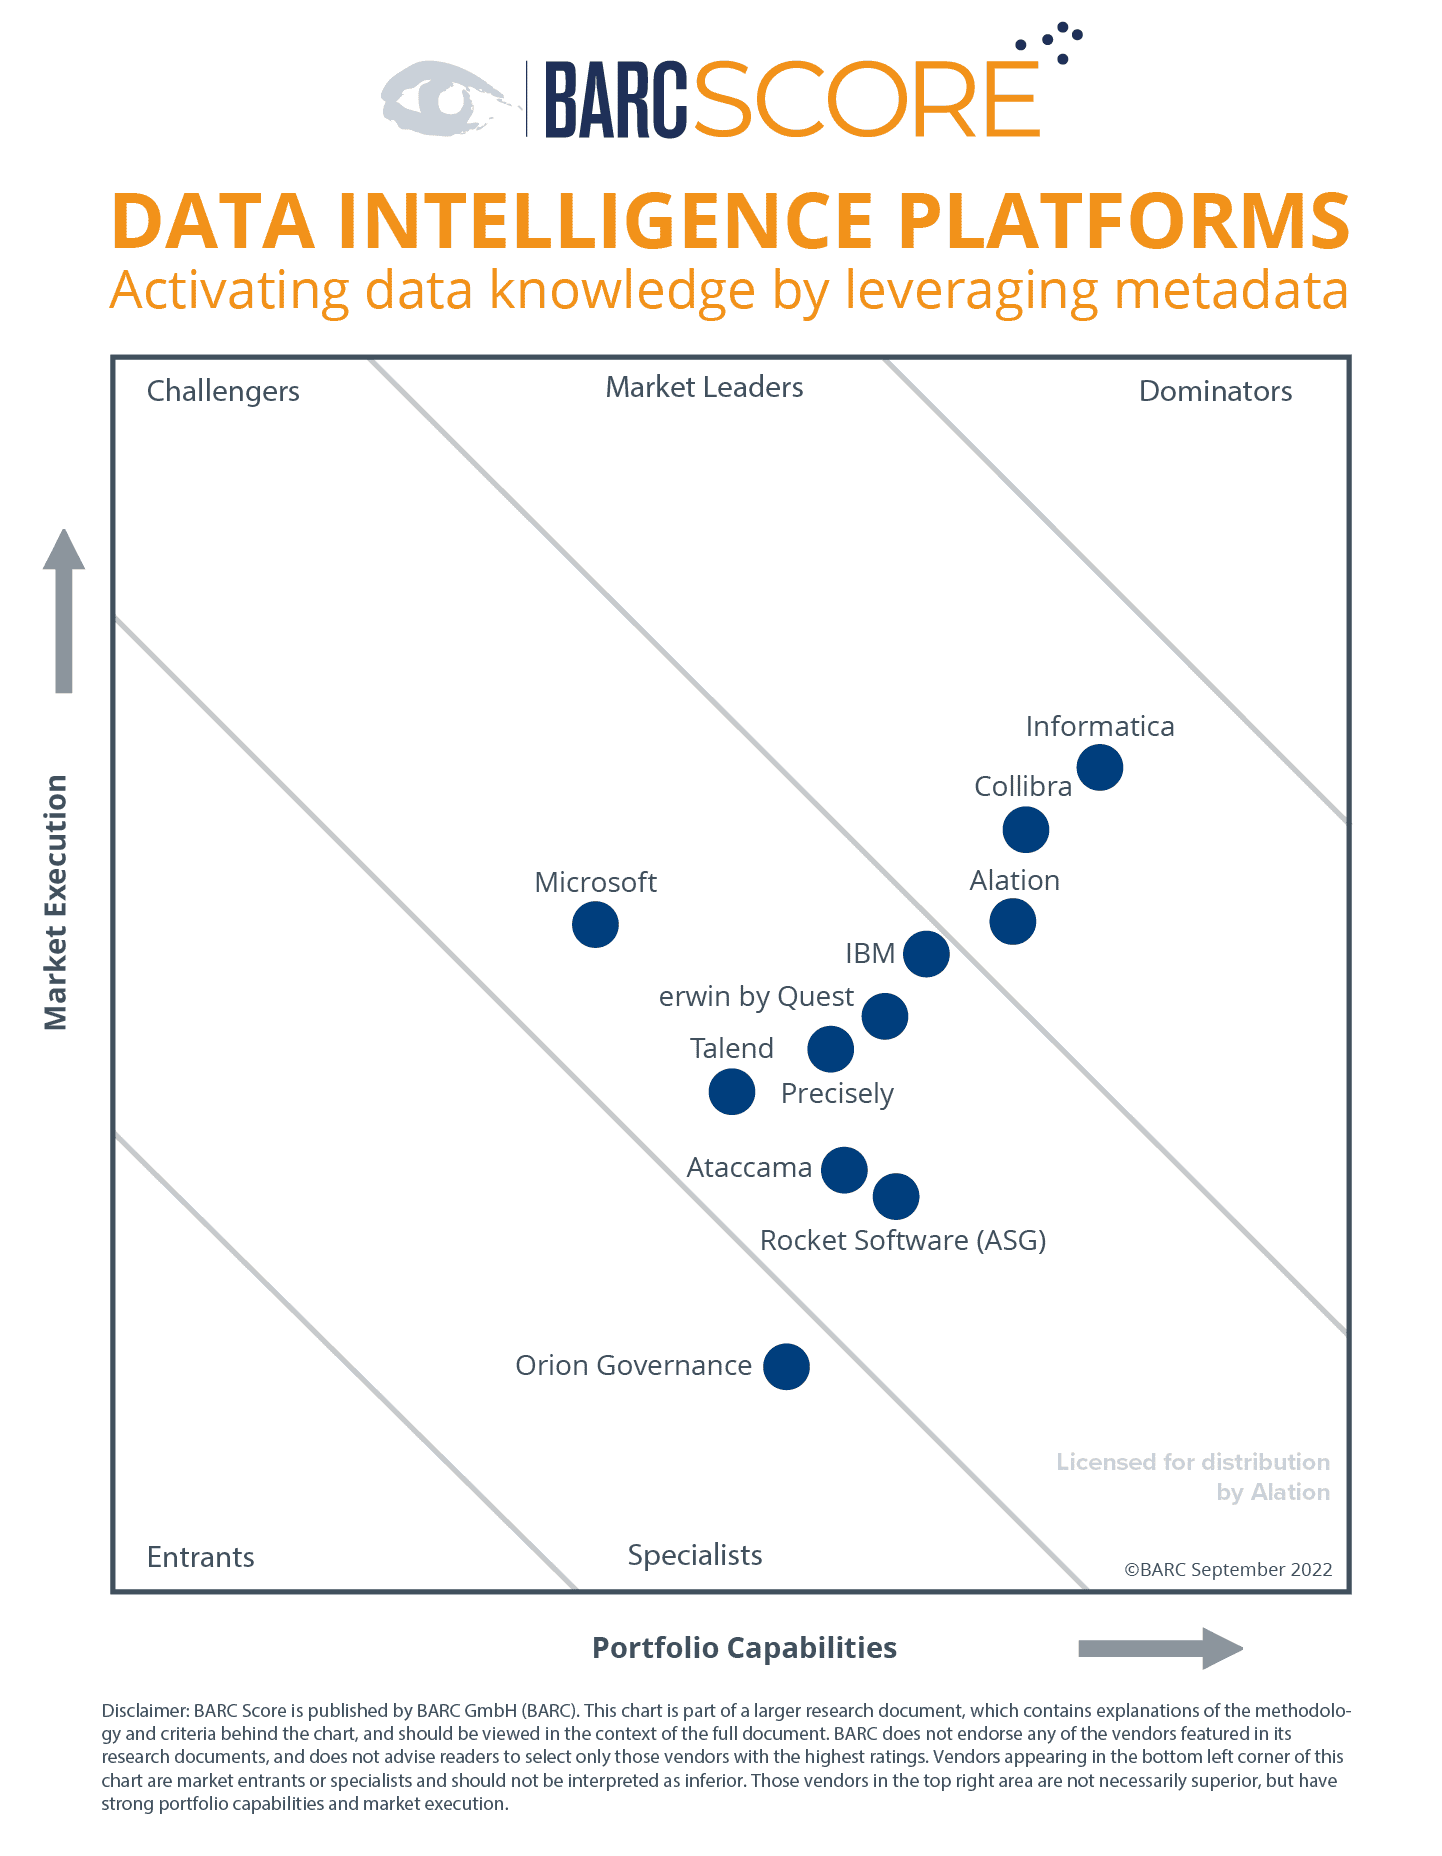 Data Intelligence platforms from the BARC report showcasing Alation as a leader.